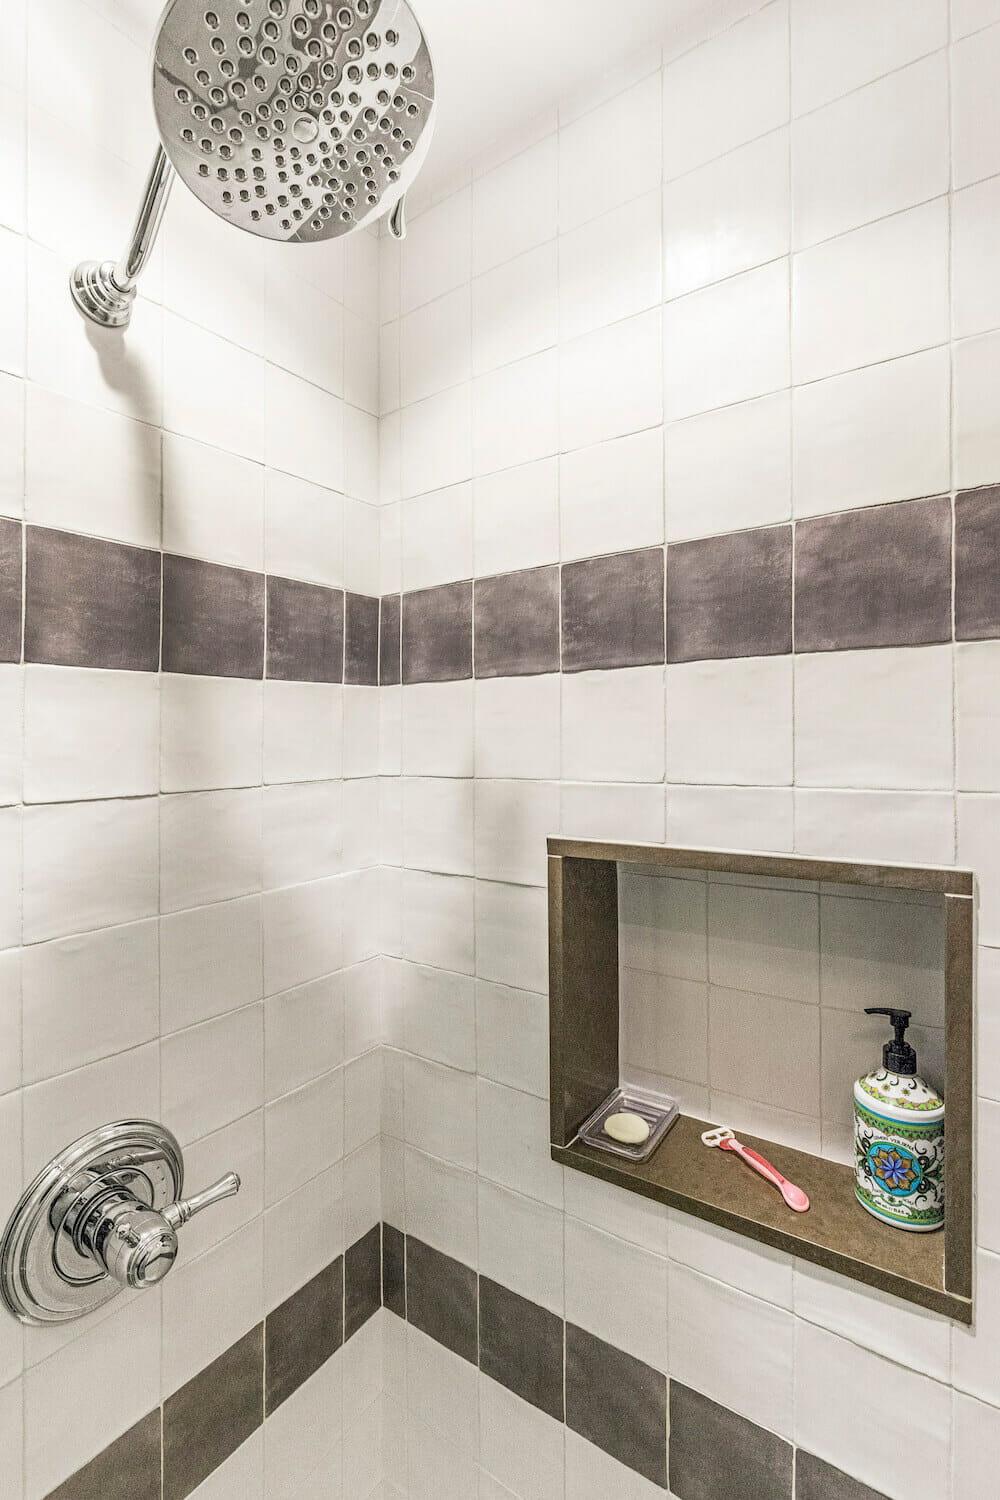 Large nickel showerhead in a white bathroom with dark gray trim after renovation